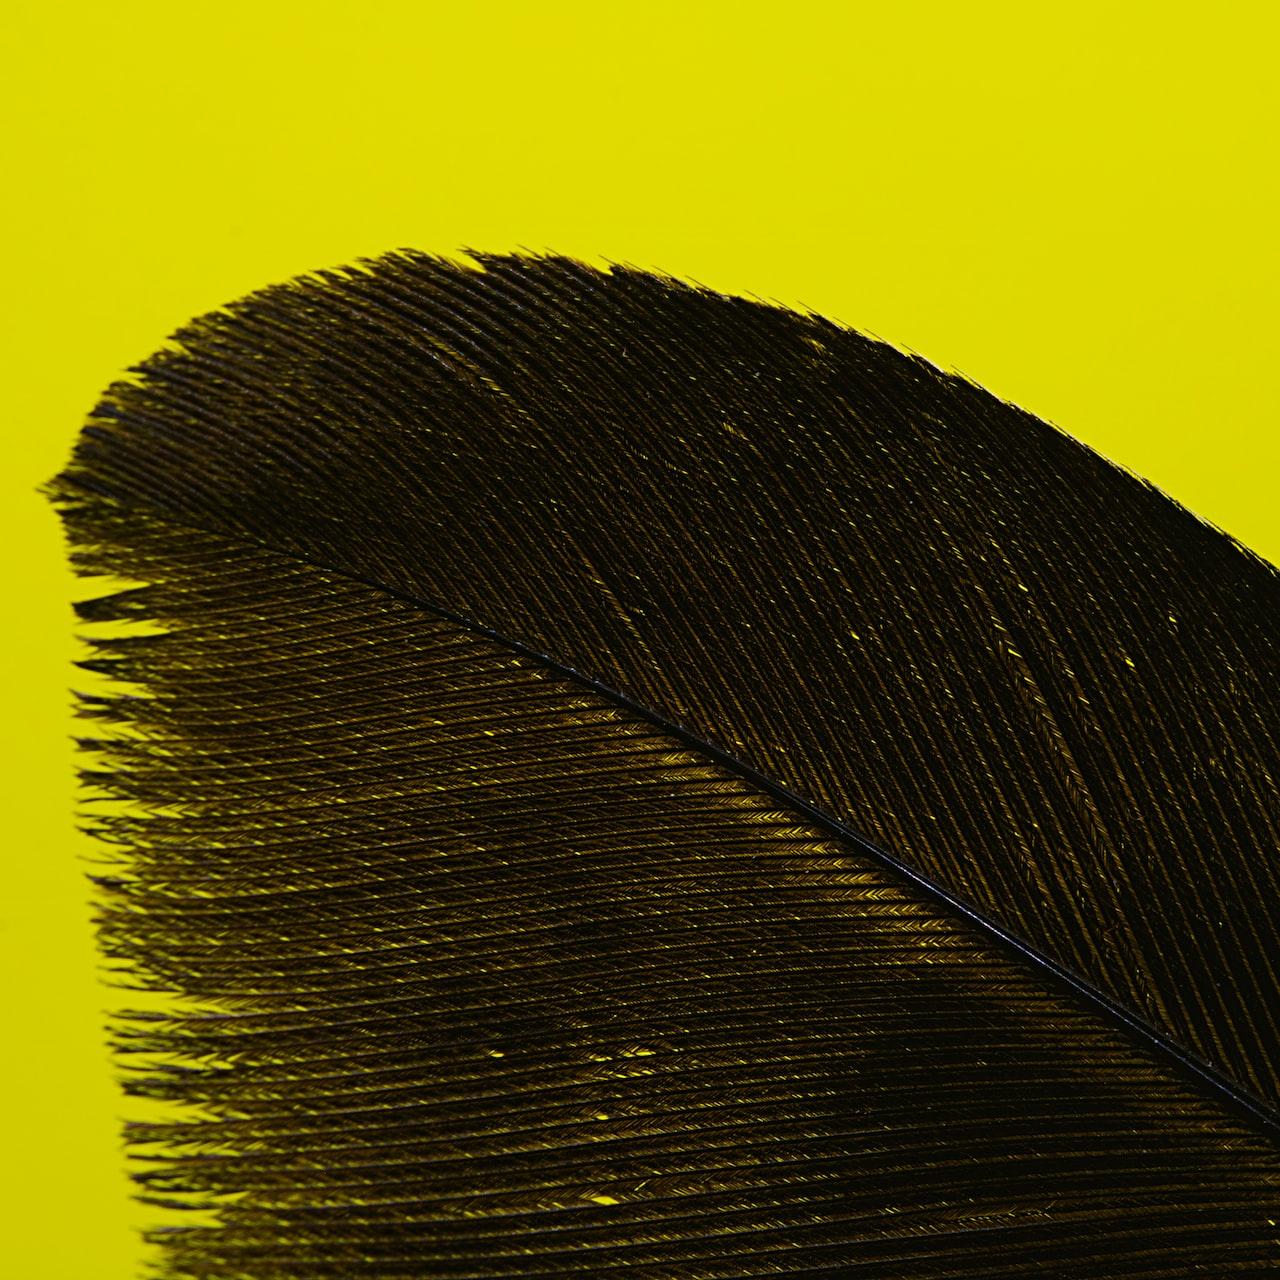 black feather on yellow background